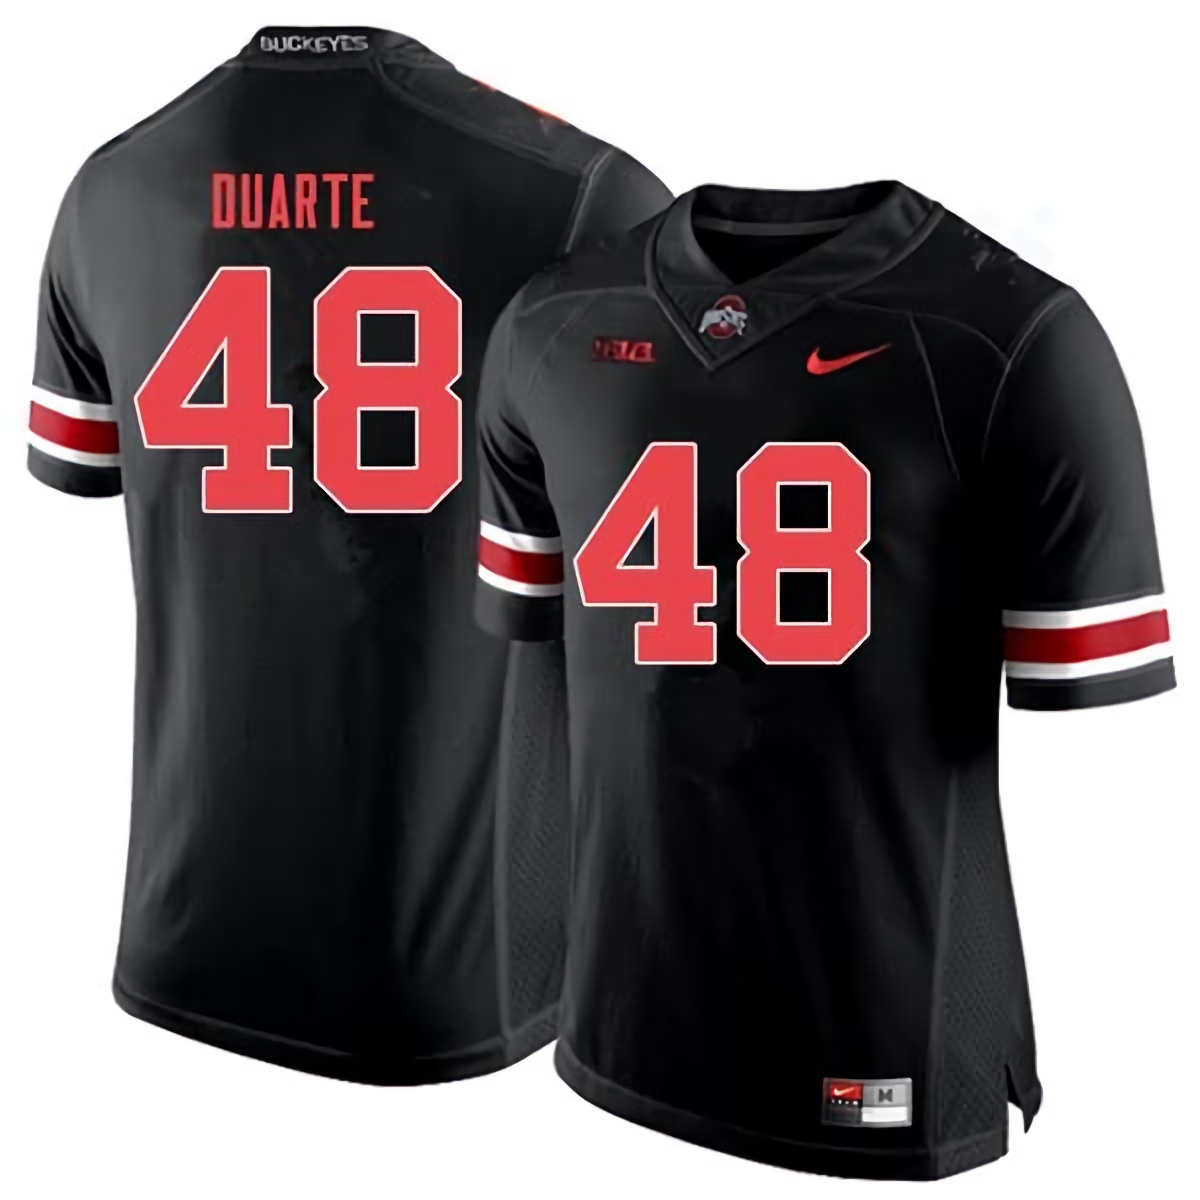 Tate Duarte Ohio State Buckeyes Men's NCAA #48 Nike Black Out College Stitched Football Jersey ANO5256TI